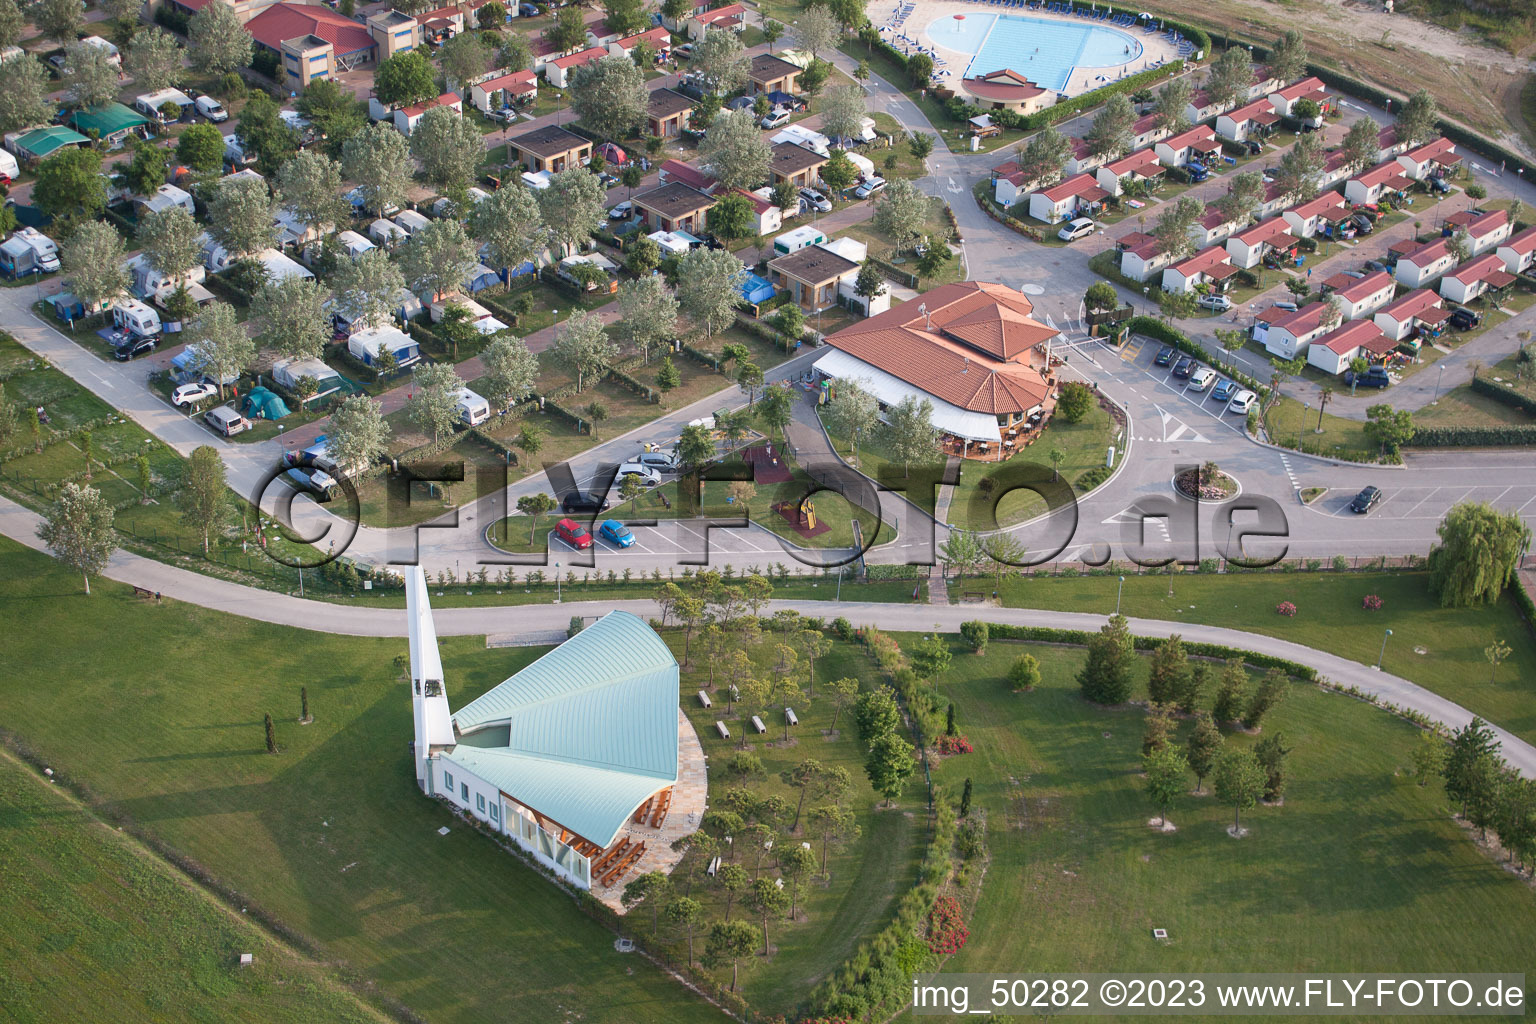 Drone image of Caorle in the state Veneto, Italy